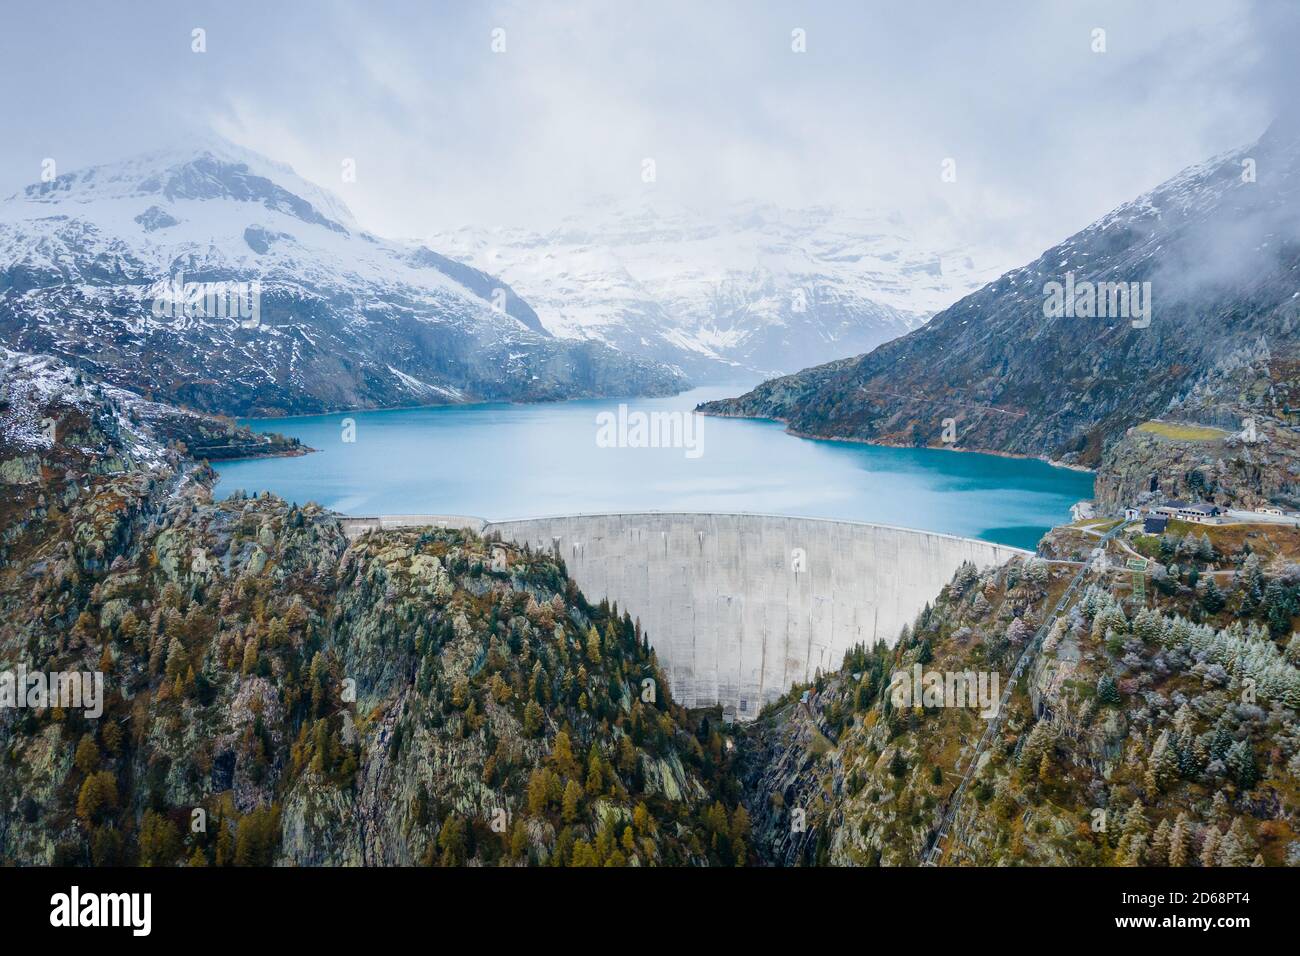 Hydropower generated from arch dam and reservoir lake in snow covered Swiss Alps mountains to produce renewable energy, sustainable hydroelectricity, Stock Photo